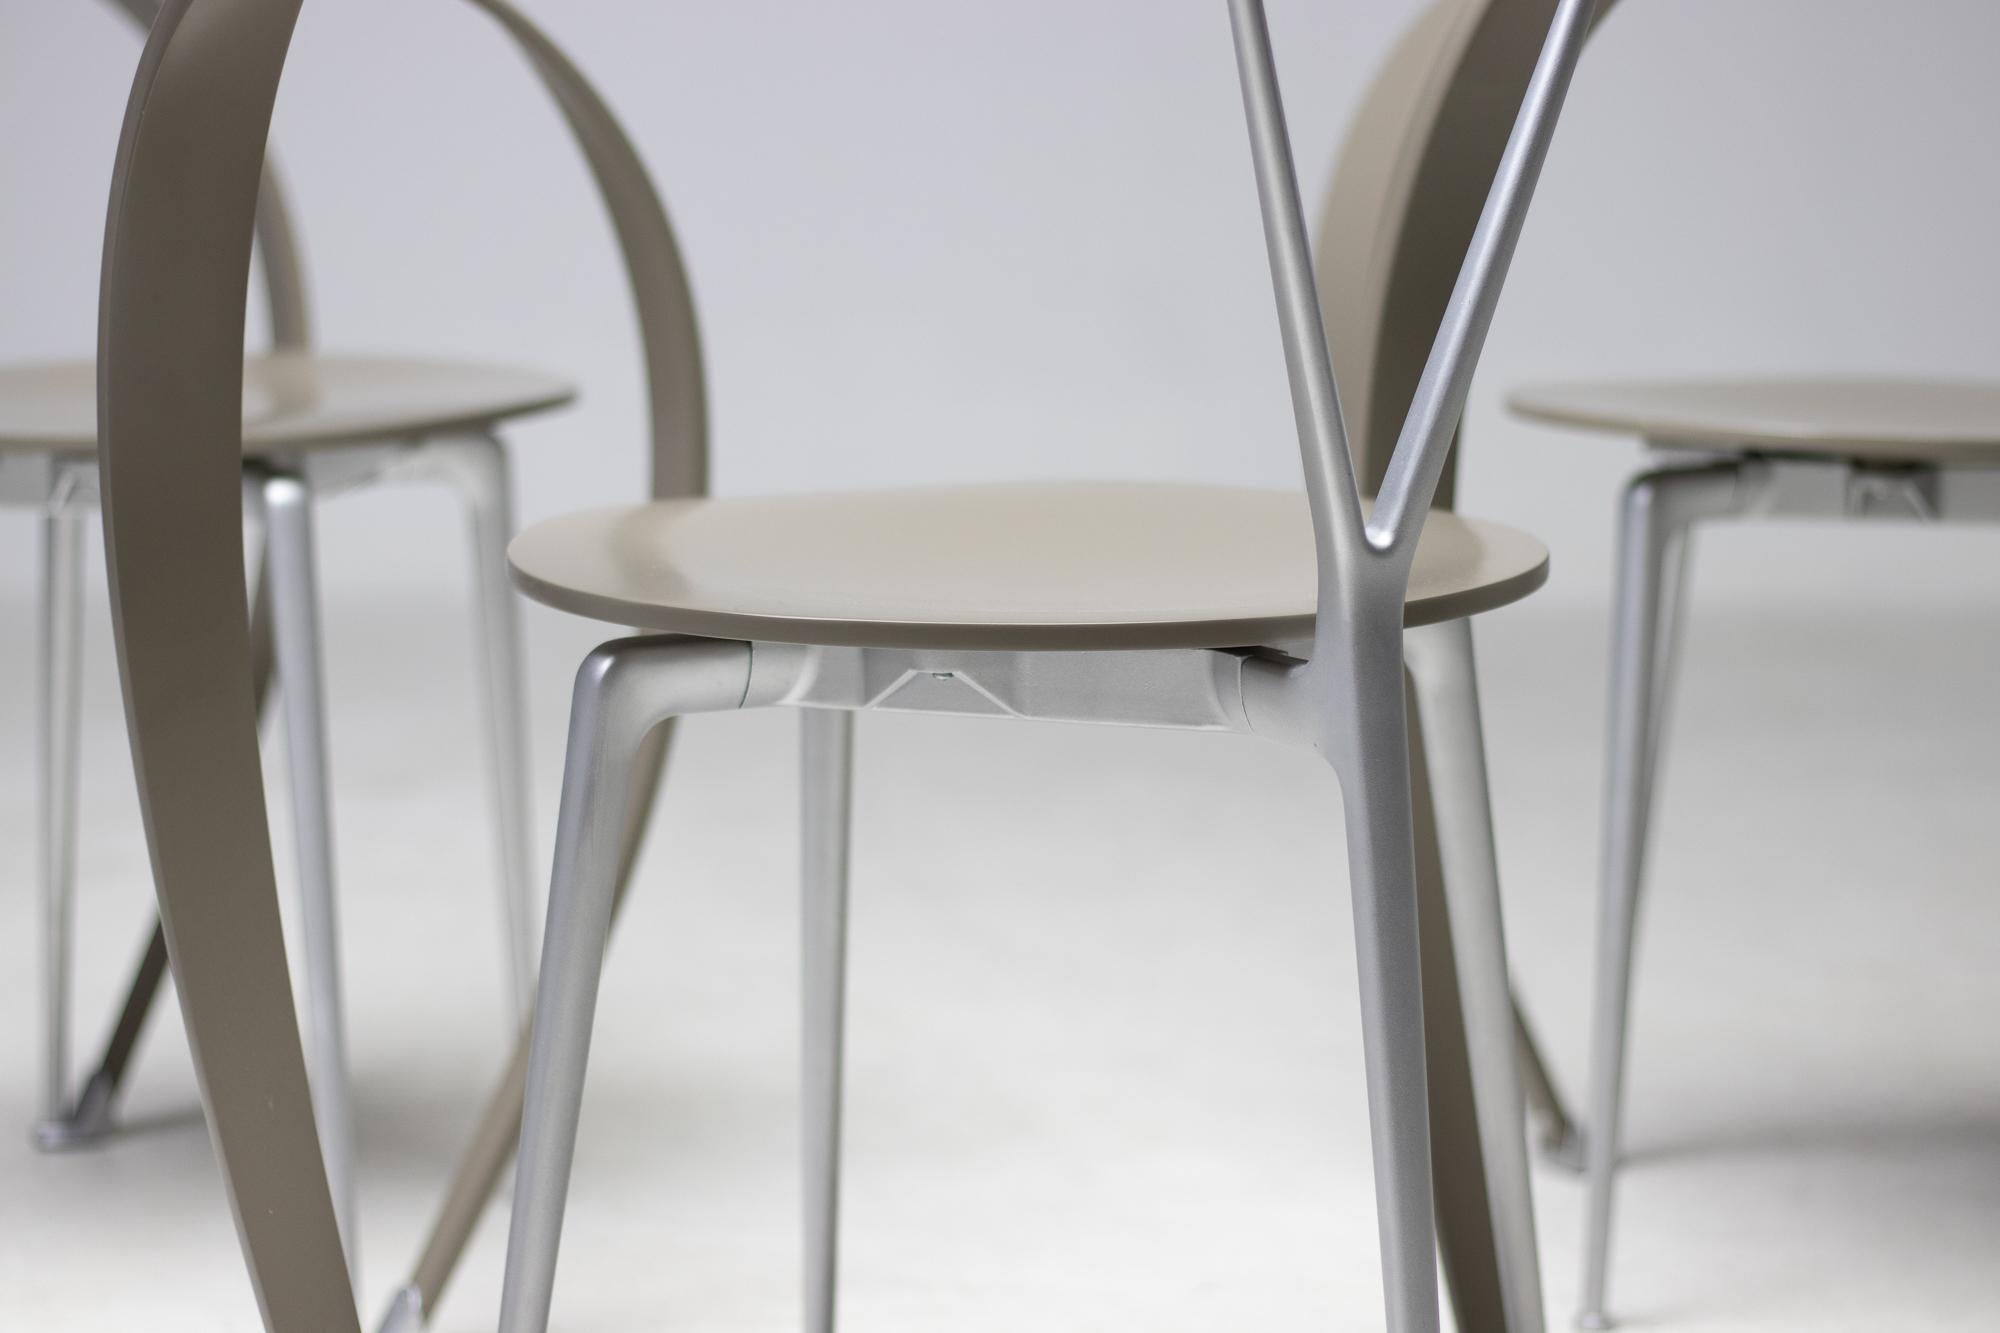 Painted Set of Six Revers Chairs by Andrea Branzi for Cassina